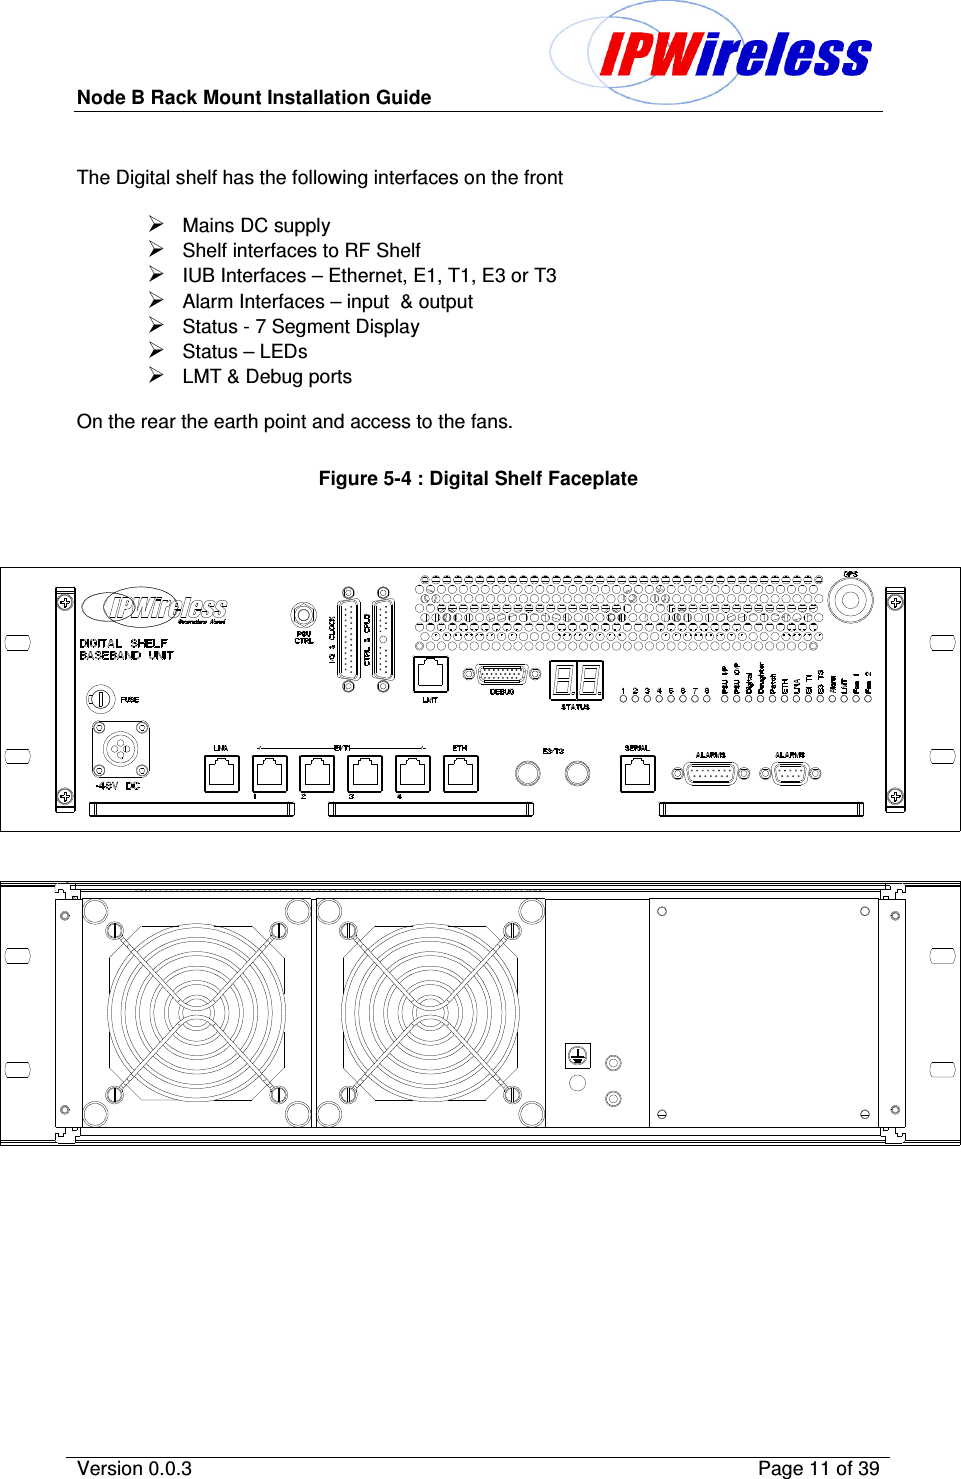 Node B Rack Mount Installation Guide                          Version 0.0.3    Page 11 of 39   The Digital shelf has the following interfaces on the front  Mains DC supply Shelf interfaces to RF Shelf IUB Interfaces – Ethernet, E1, T1, E3 or T3 Alarm Interfaces – input  &amp; output Status - 7 Segment Display Status – LEDs LMT &amp; Debug ports  On the rear the earth point and access to the fans.  Figure 5-4 : Digital Shelf Faceplate  